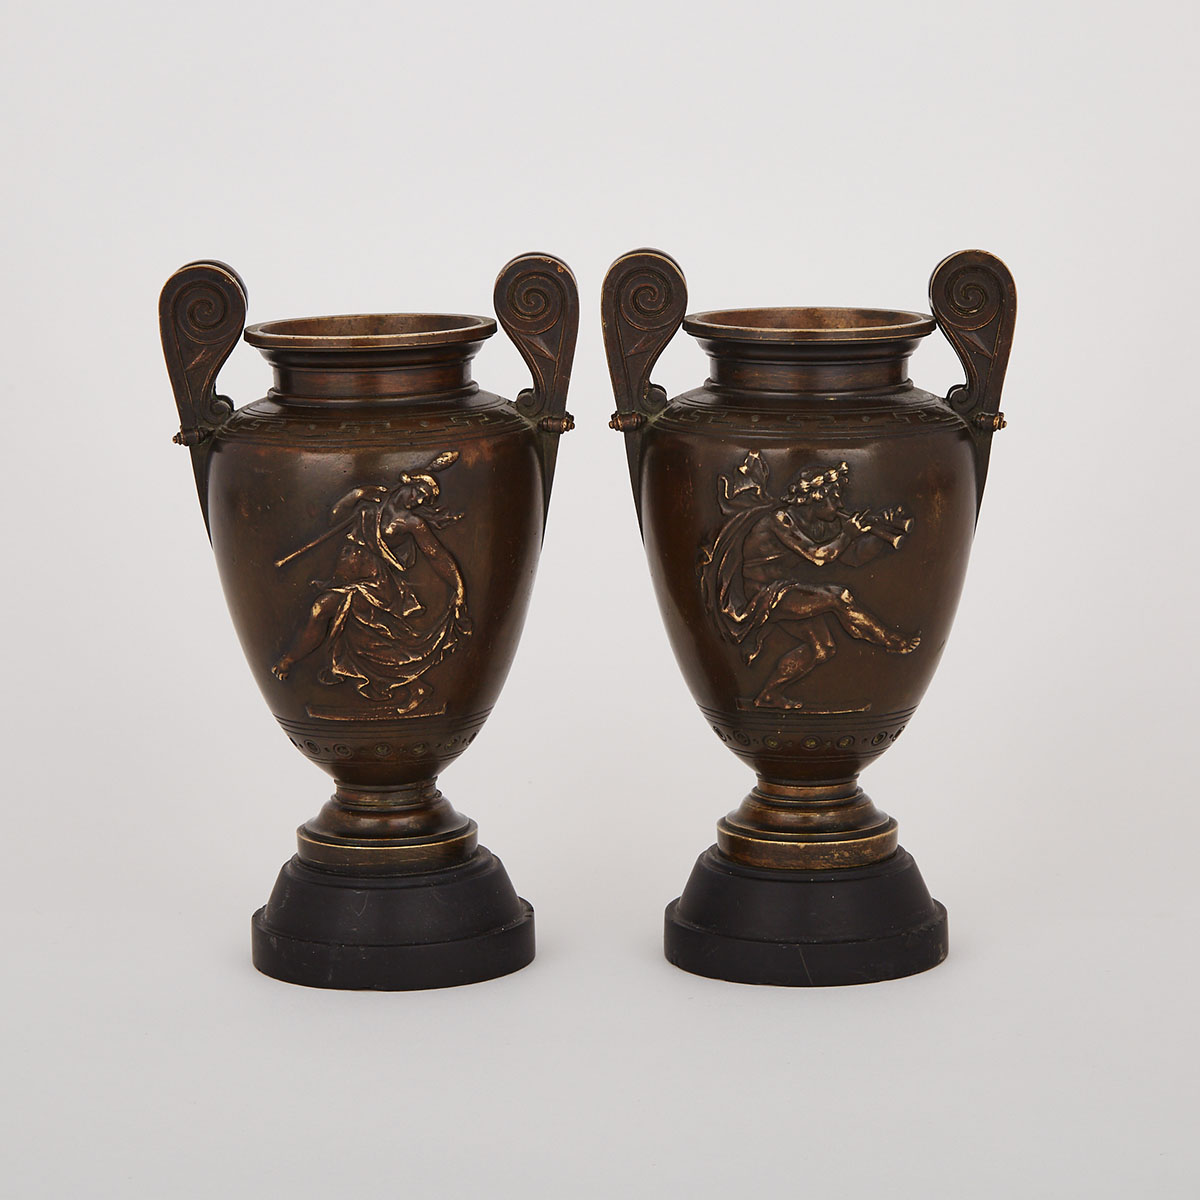 Pair of French Patinated Bronze Classical Urn form Garniture, c.1880